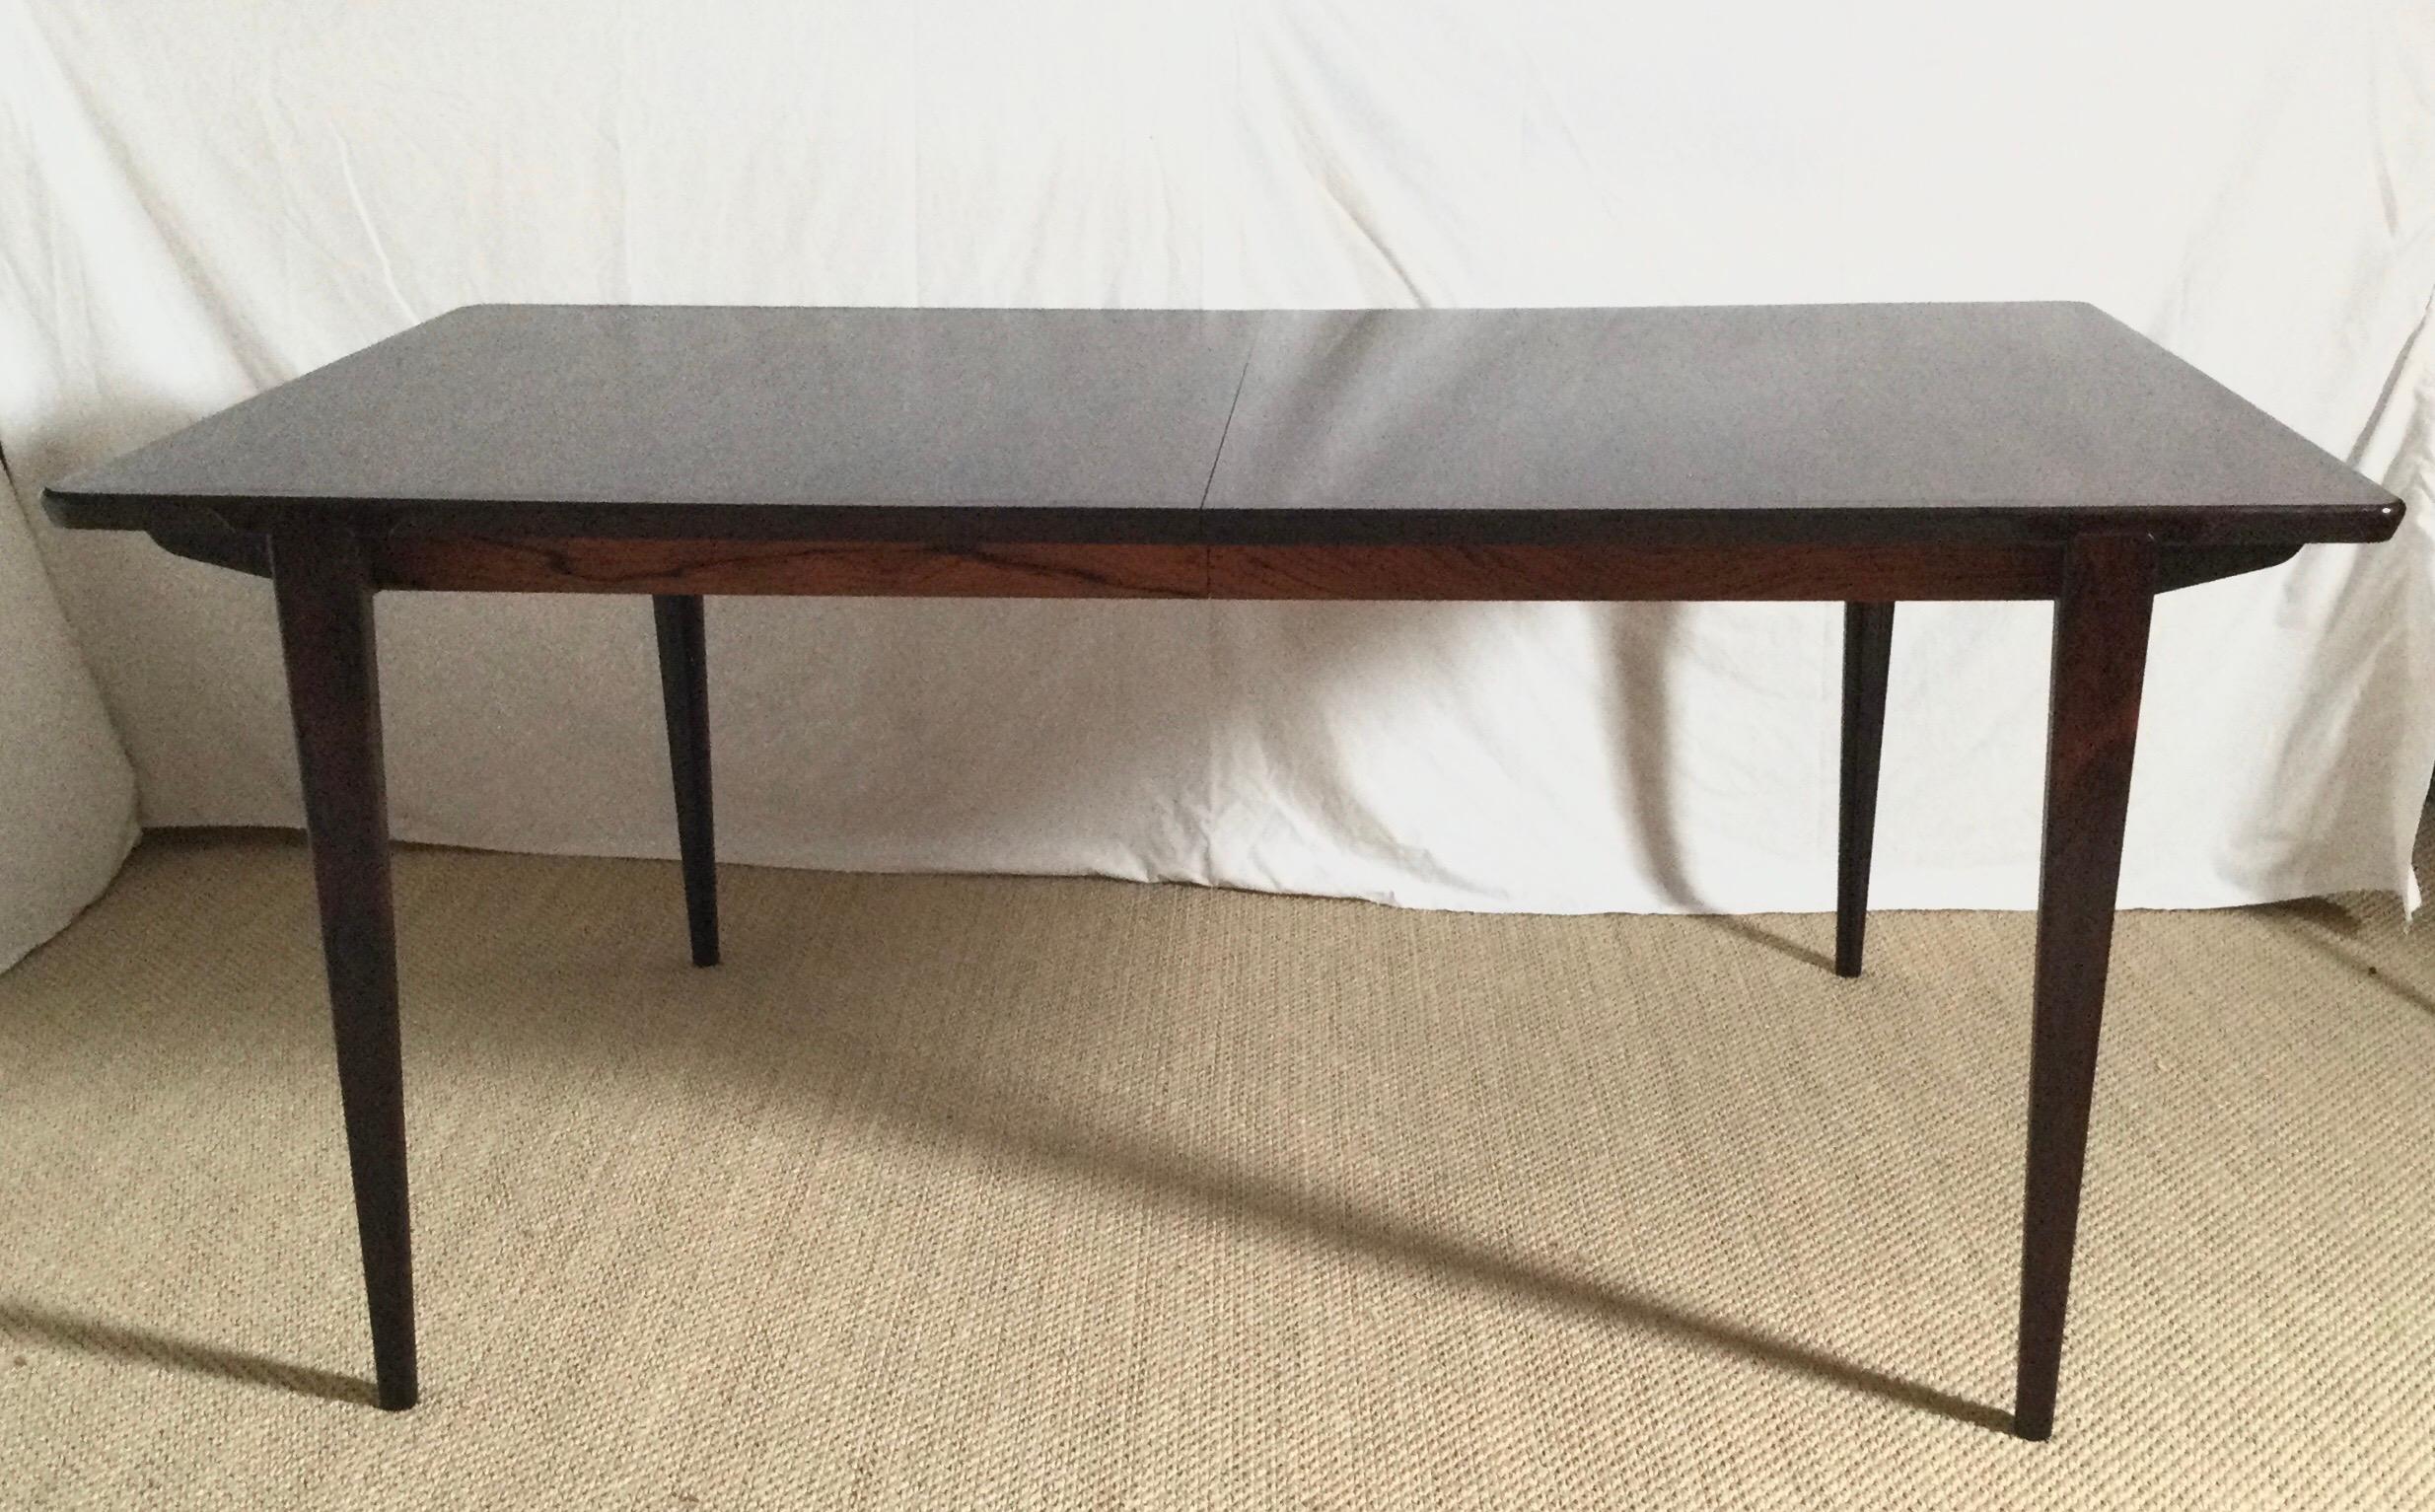 Elegant rosewood dining table by Henry Rosengren Hansen produced by Brande Mobelfabrik. A solid edge top floats above a sculpted rosewood base with legs. The table 65 inches long with two 17 inch leaves that are stored inside the table. Fully opens